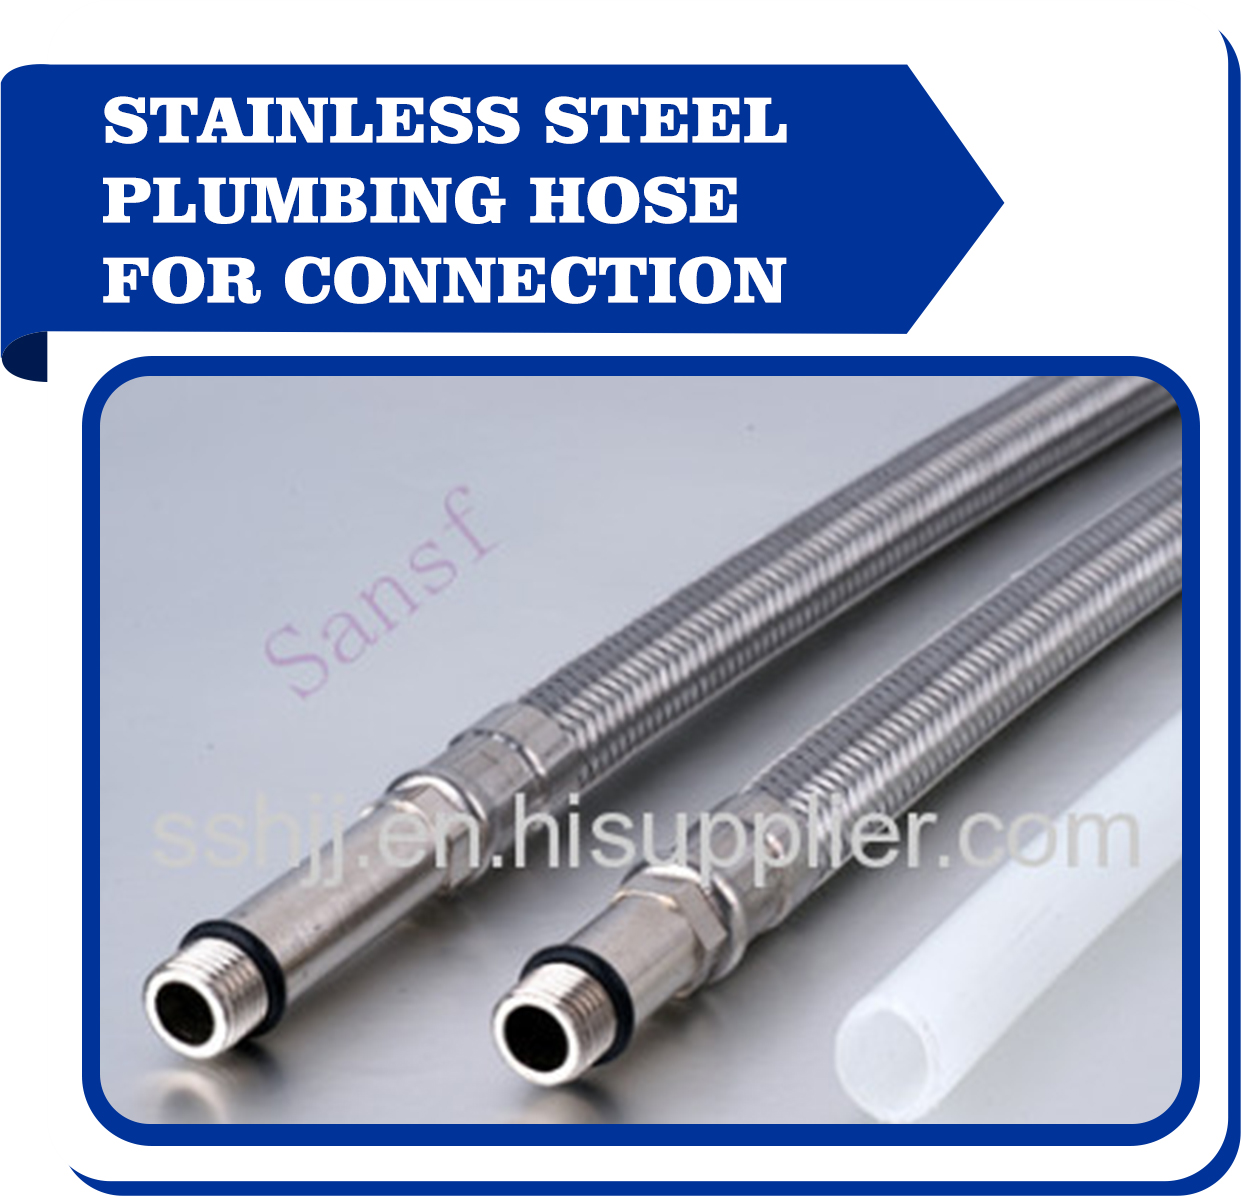 stainless steel plumbing hose for connection